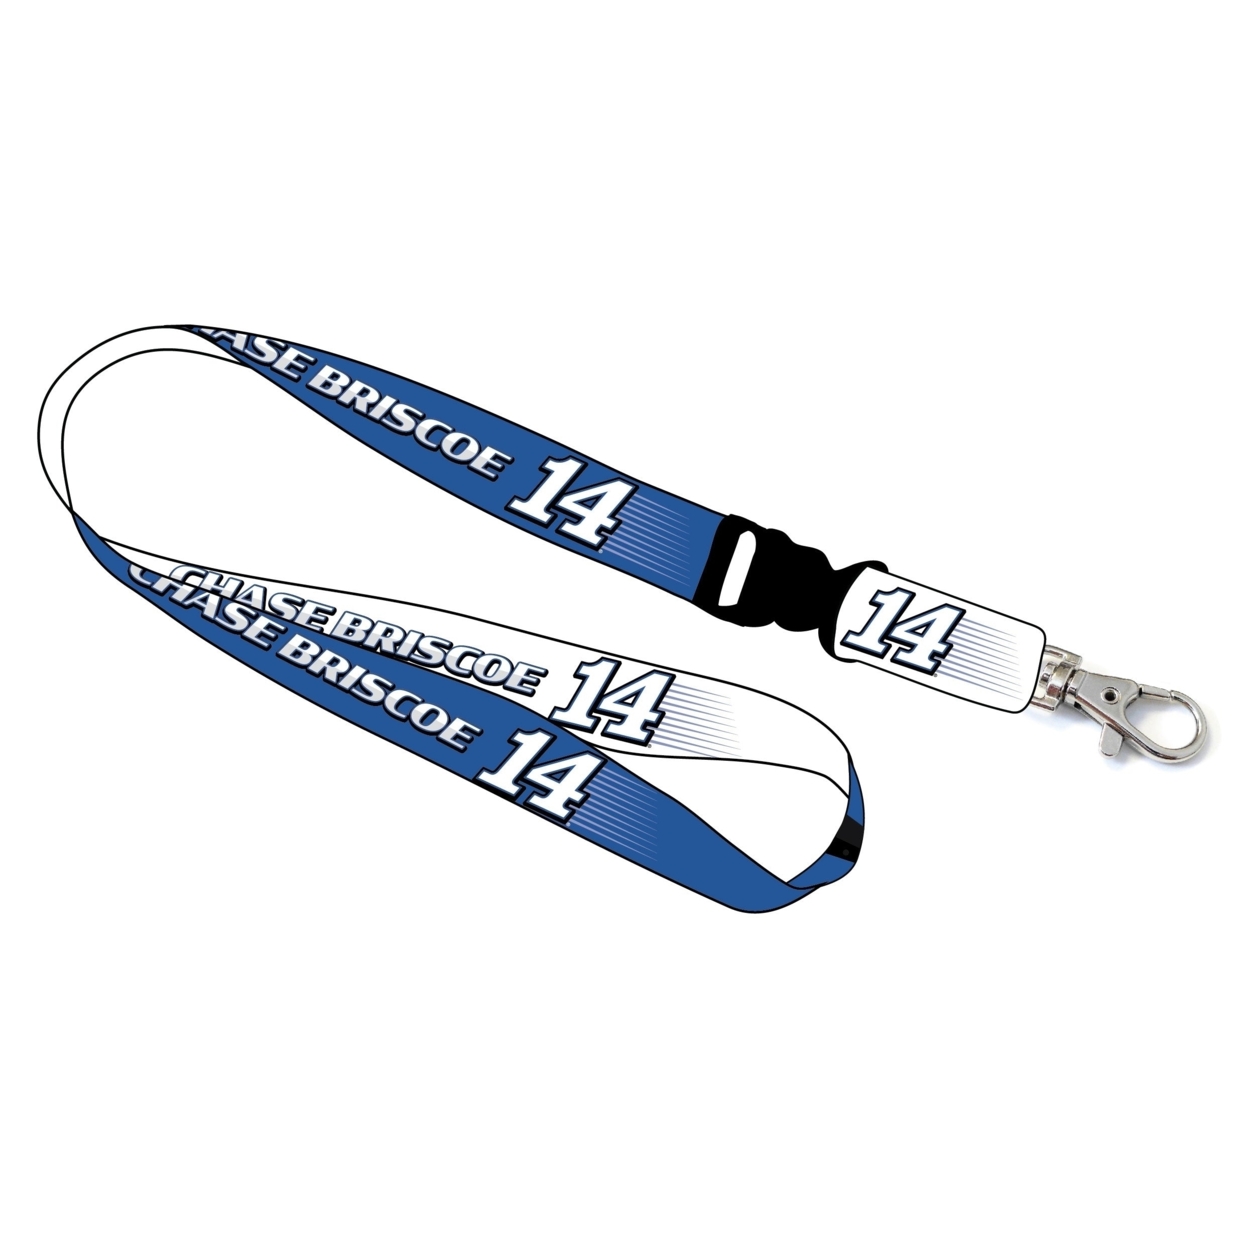 Chase Briscoe #14 NASCAR Cup Series Lanyard New For 2021